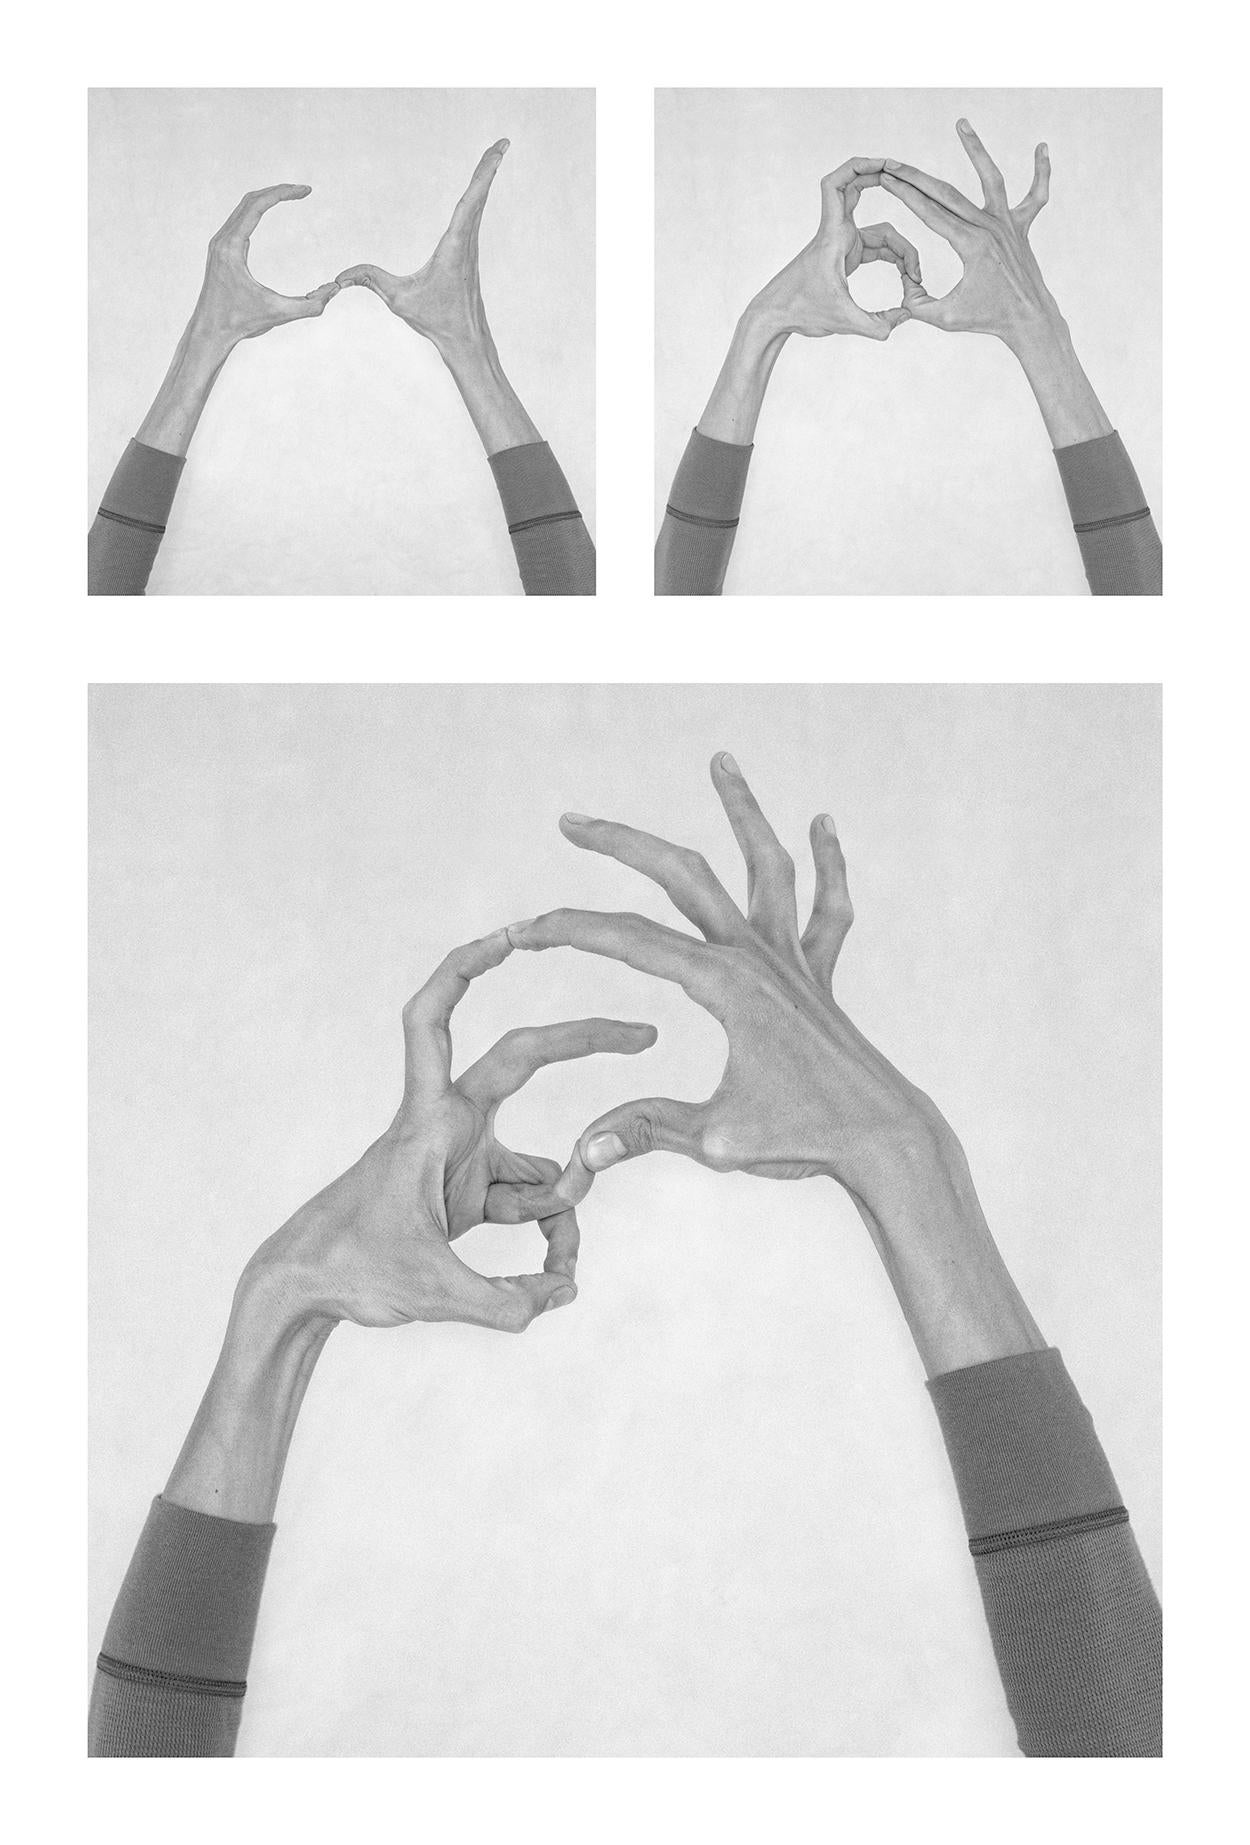 Nico Baixas / Gos-com-fuig Figurative Photograph - Untitled XXX, XXXI, and XXXIII Hands  From the Series Chiromorphose. 